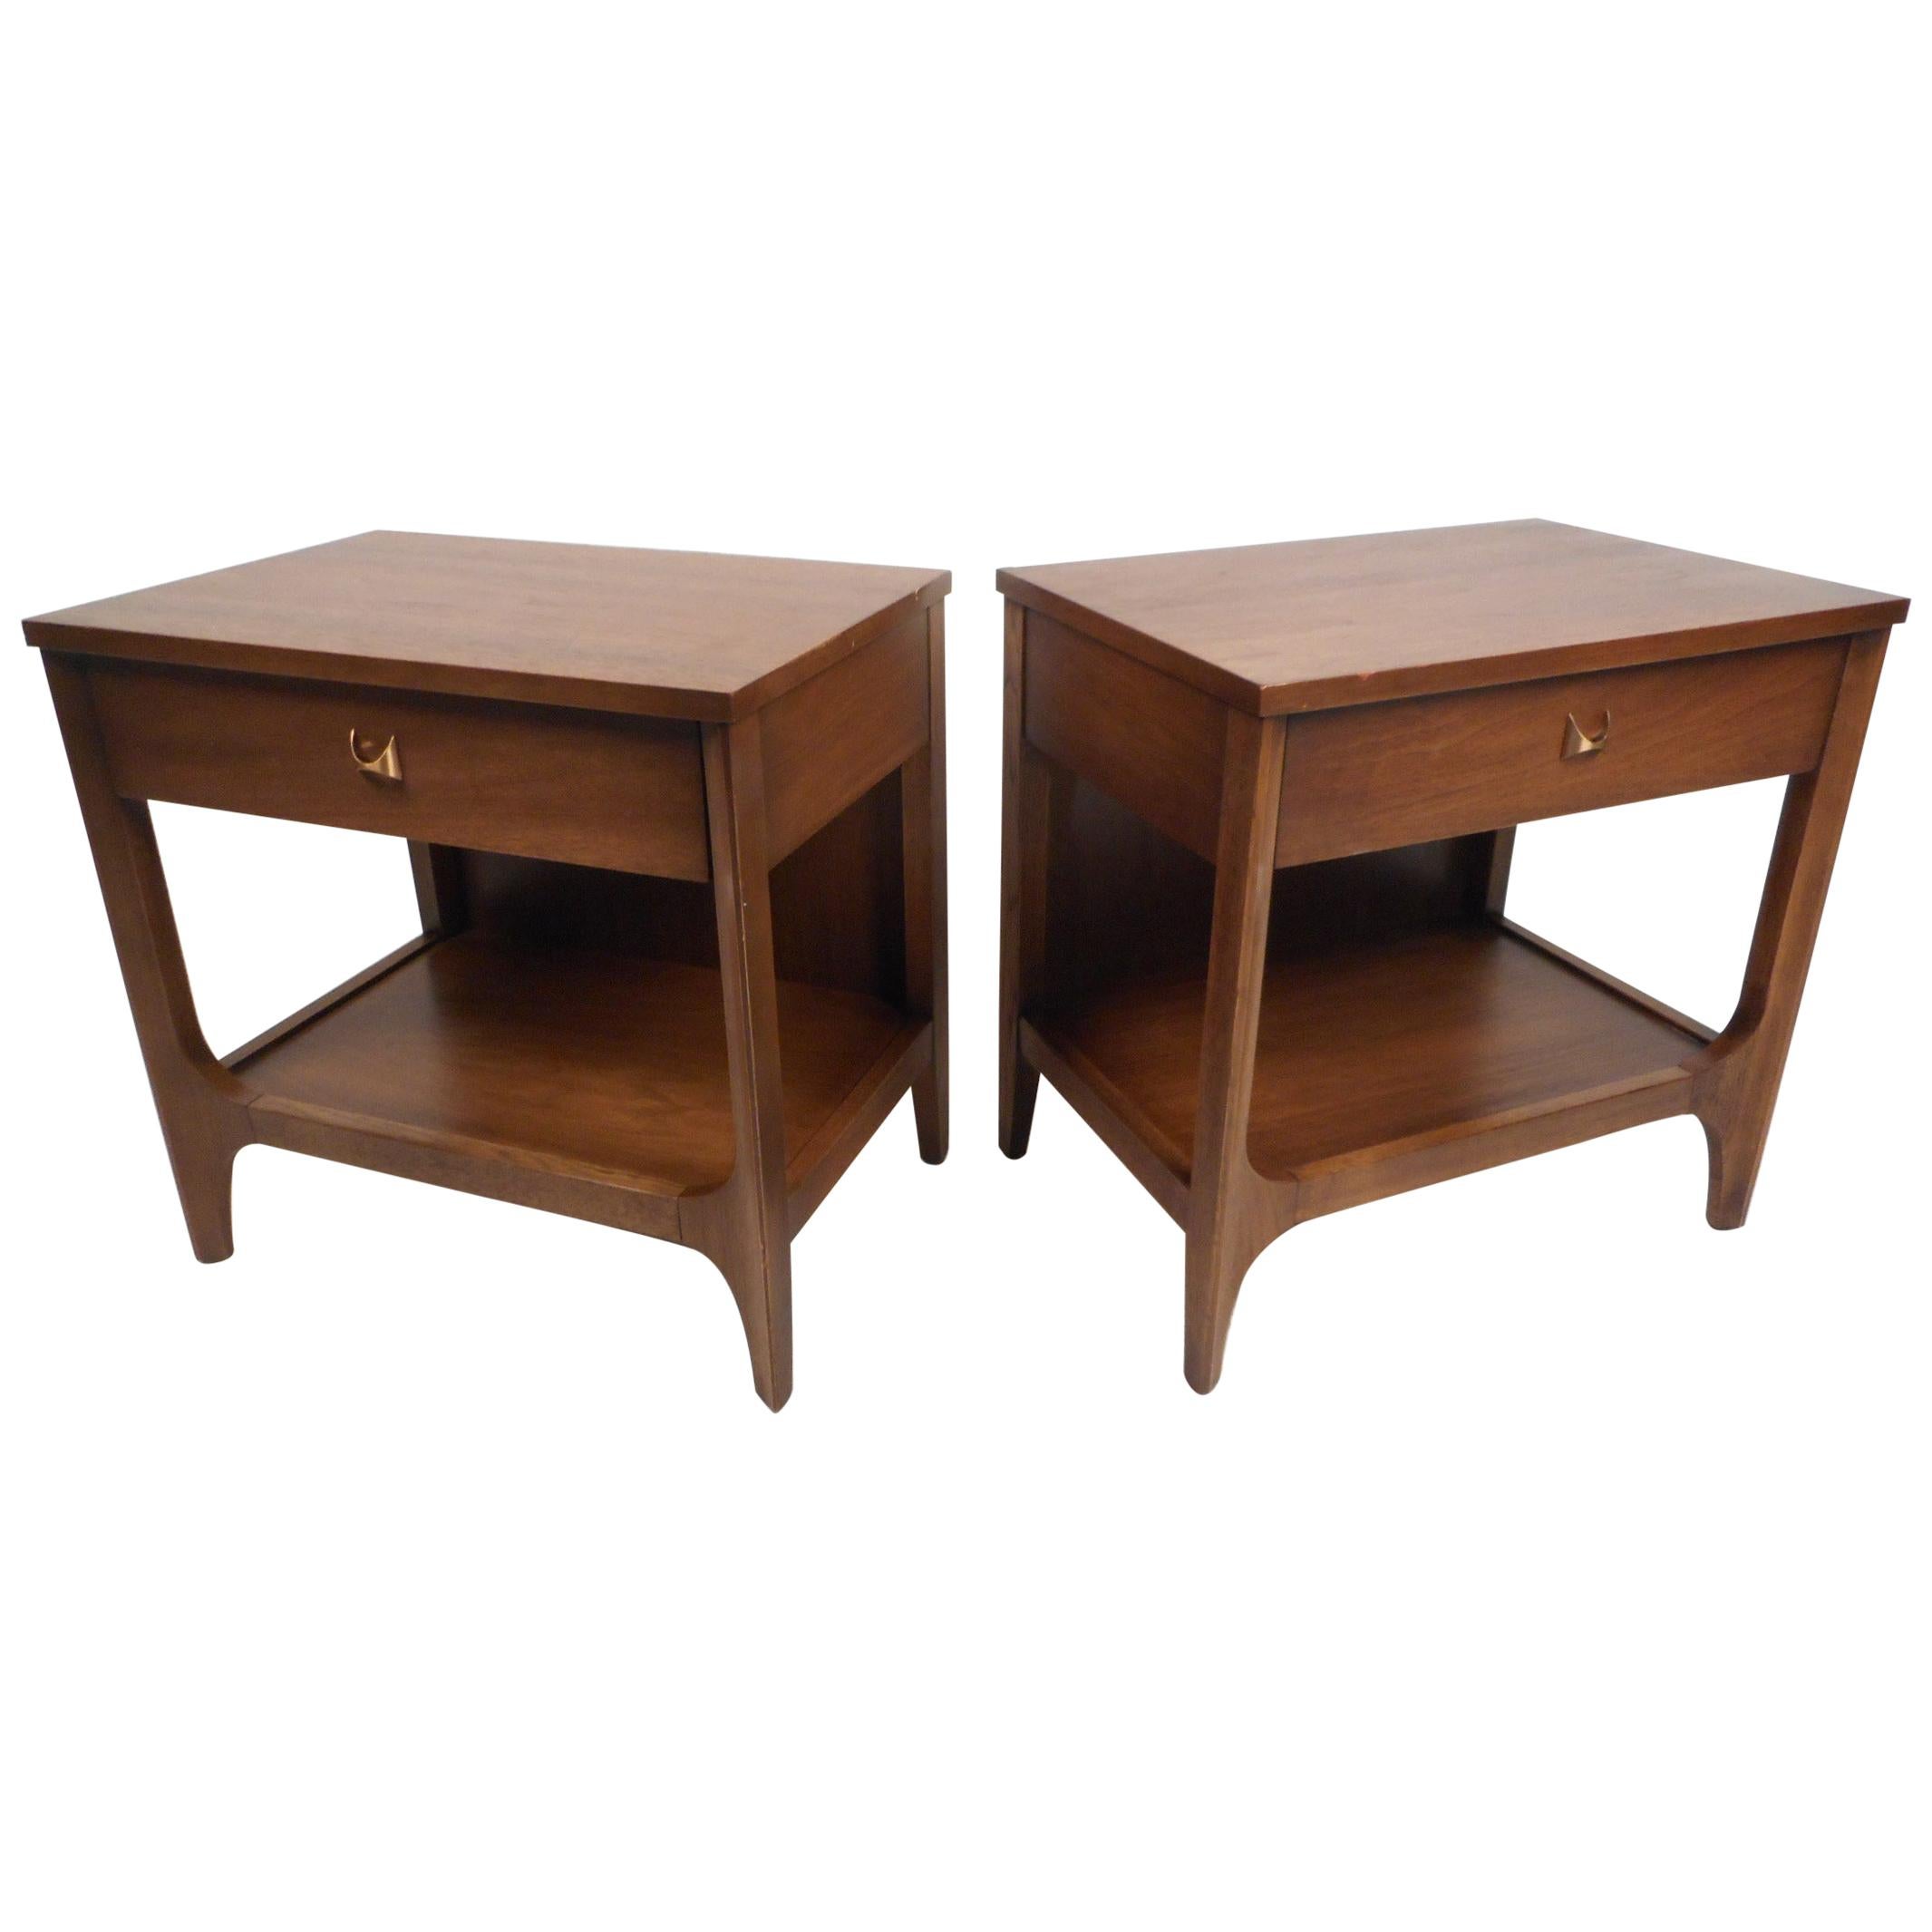 Pair of Midcentury Nightstands or End Tables by Broyhill